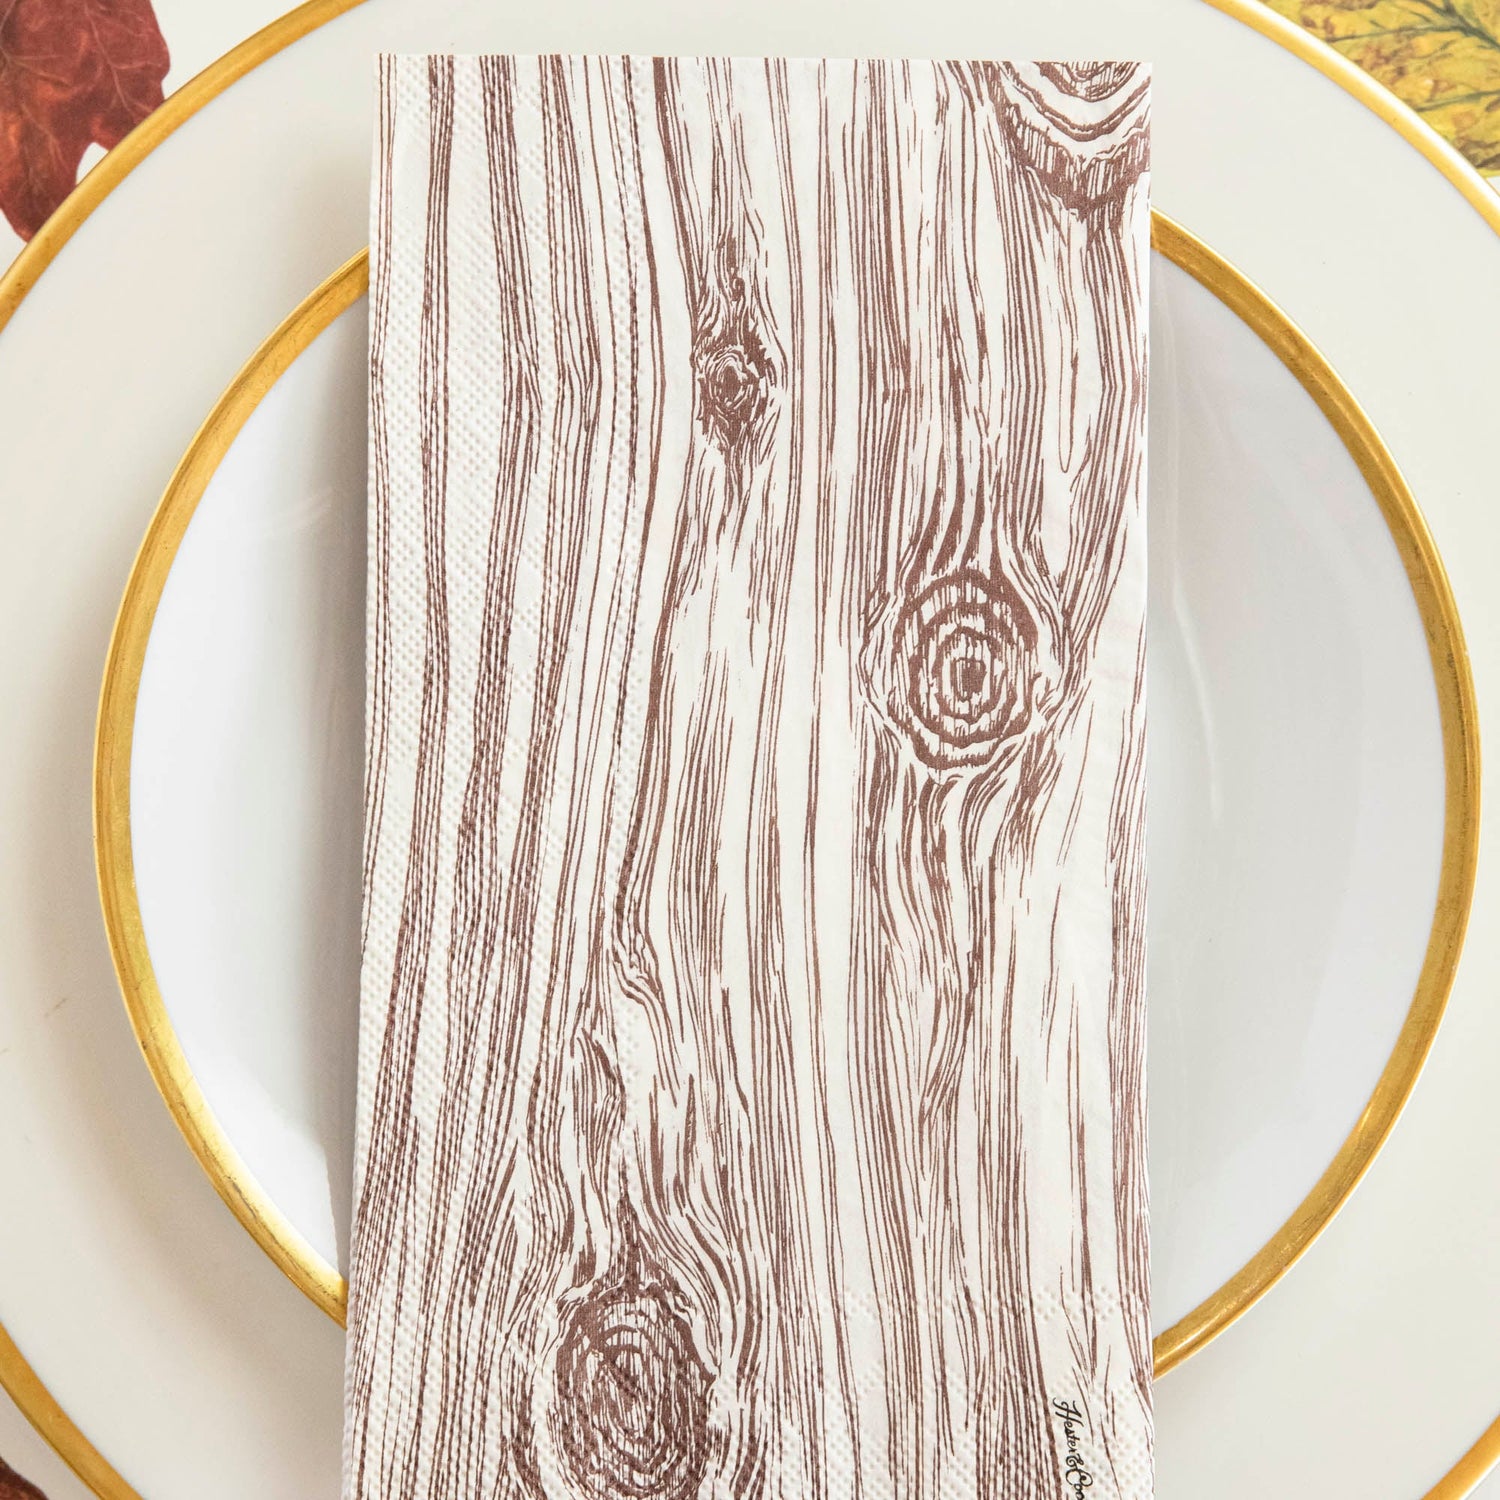 An Oak Guest Napkin centered on a gold-rimmed plate in a fall-themed place setting.